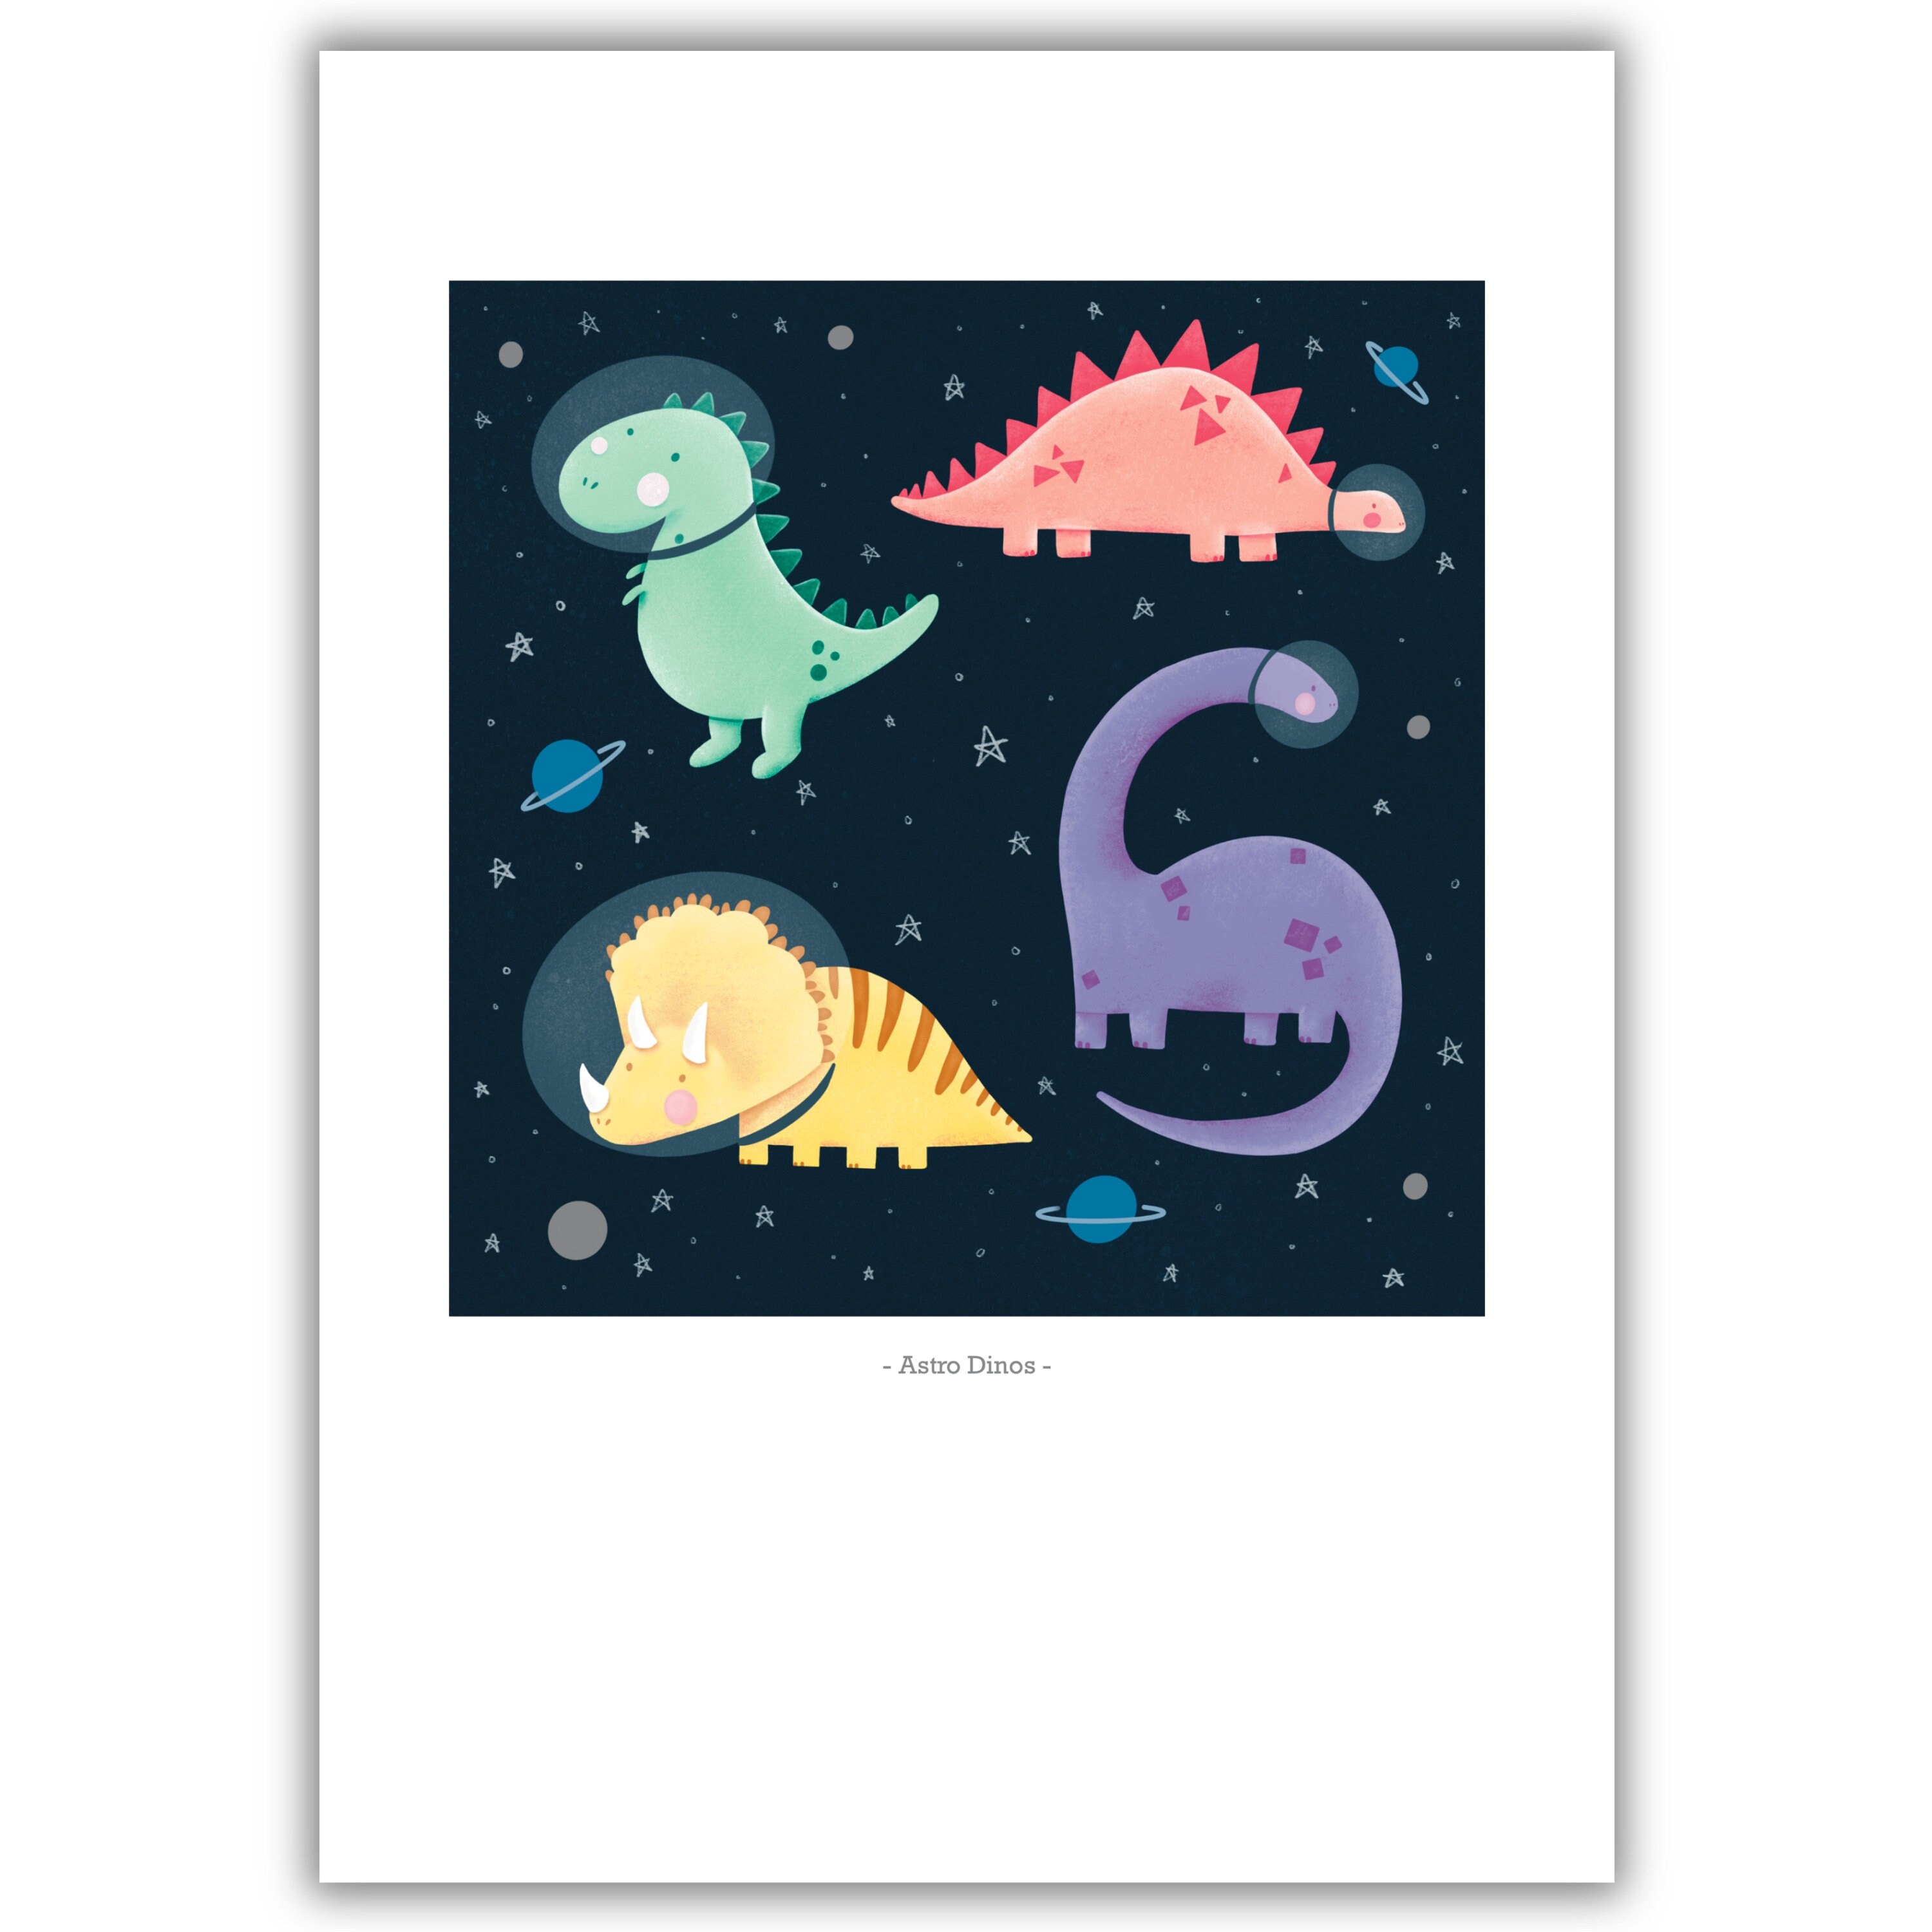 Astro Dinos Outer Space Dinosaurs A4 Illustration Art Print | Etsy